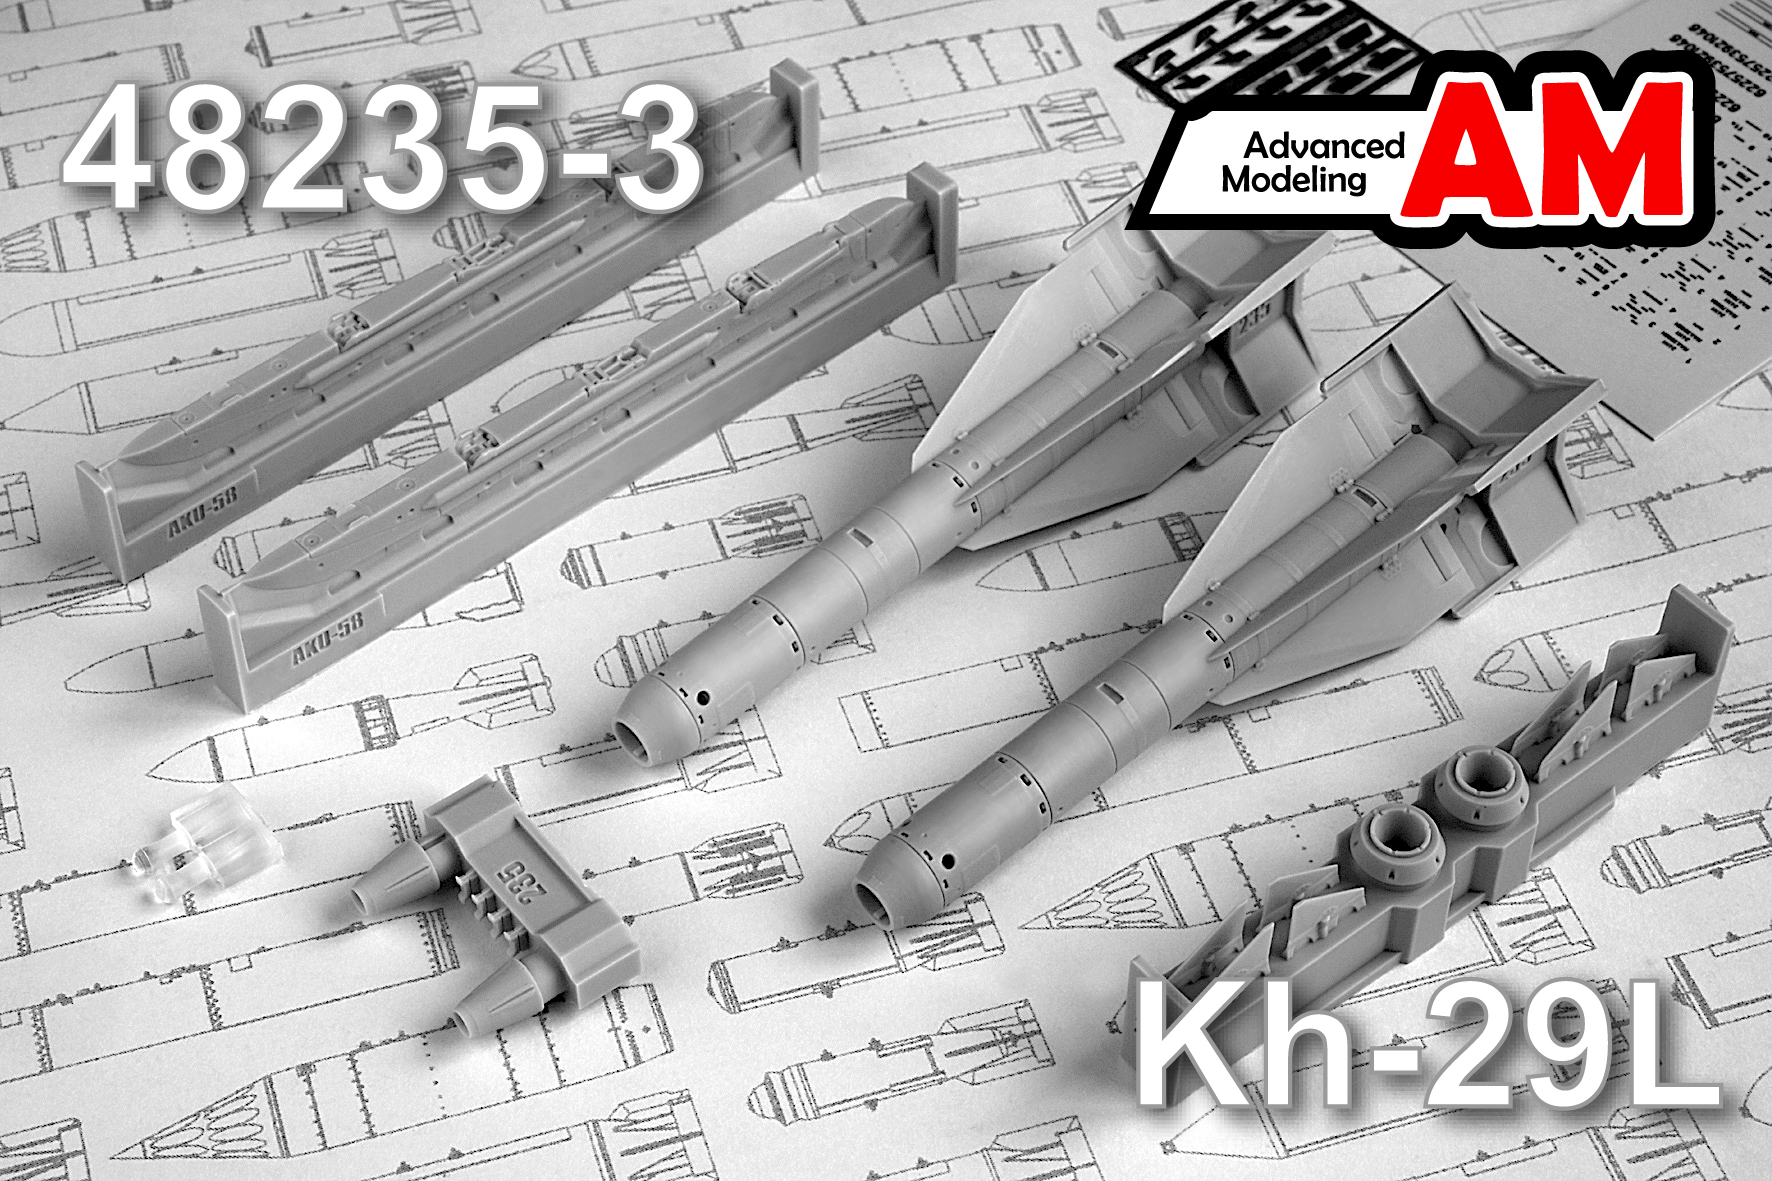 Additions (3D resin printing) 1/48 Aircraft guided missile Kh-29Л with launcher AKU-58 (Advanced Modeling) 